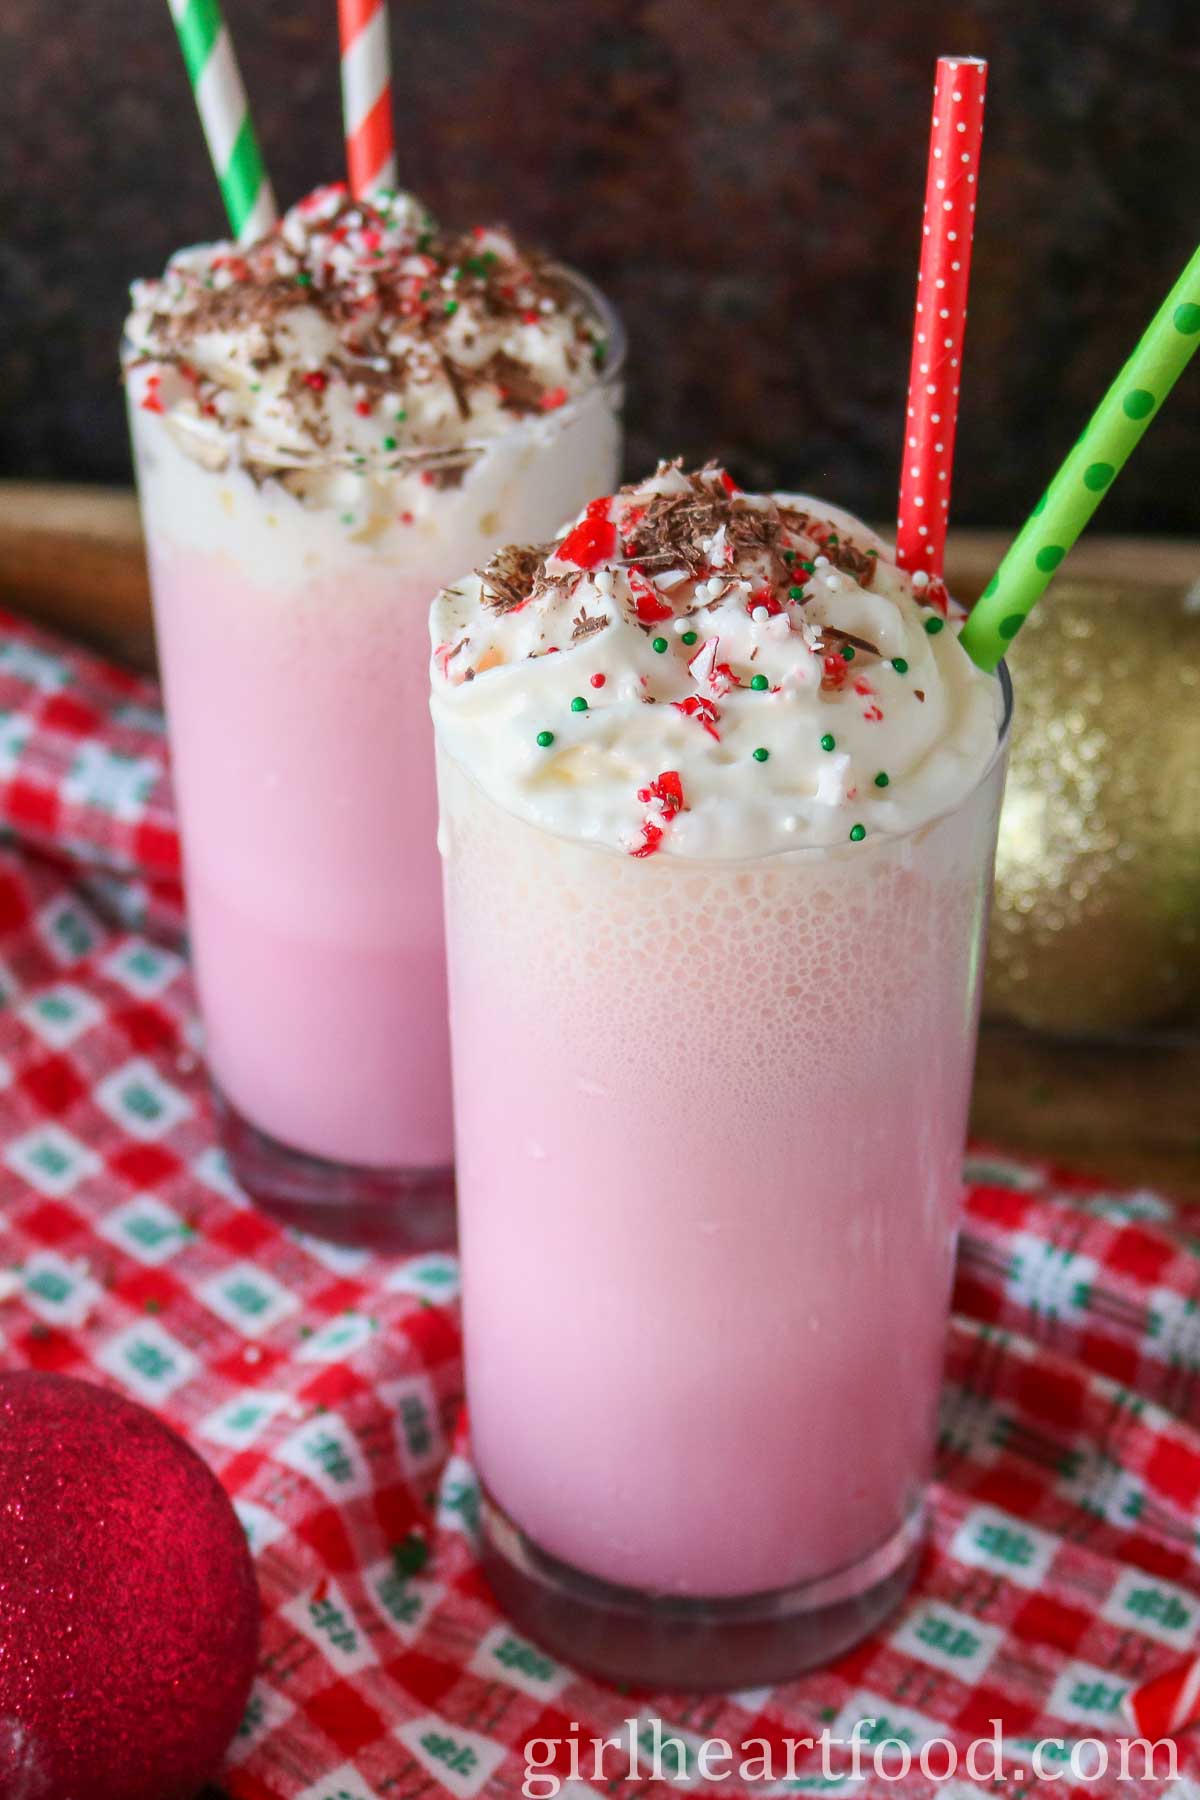 Two glasses of pink candy cane milkshake with whipped cream and toppings.